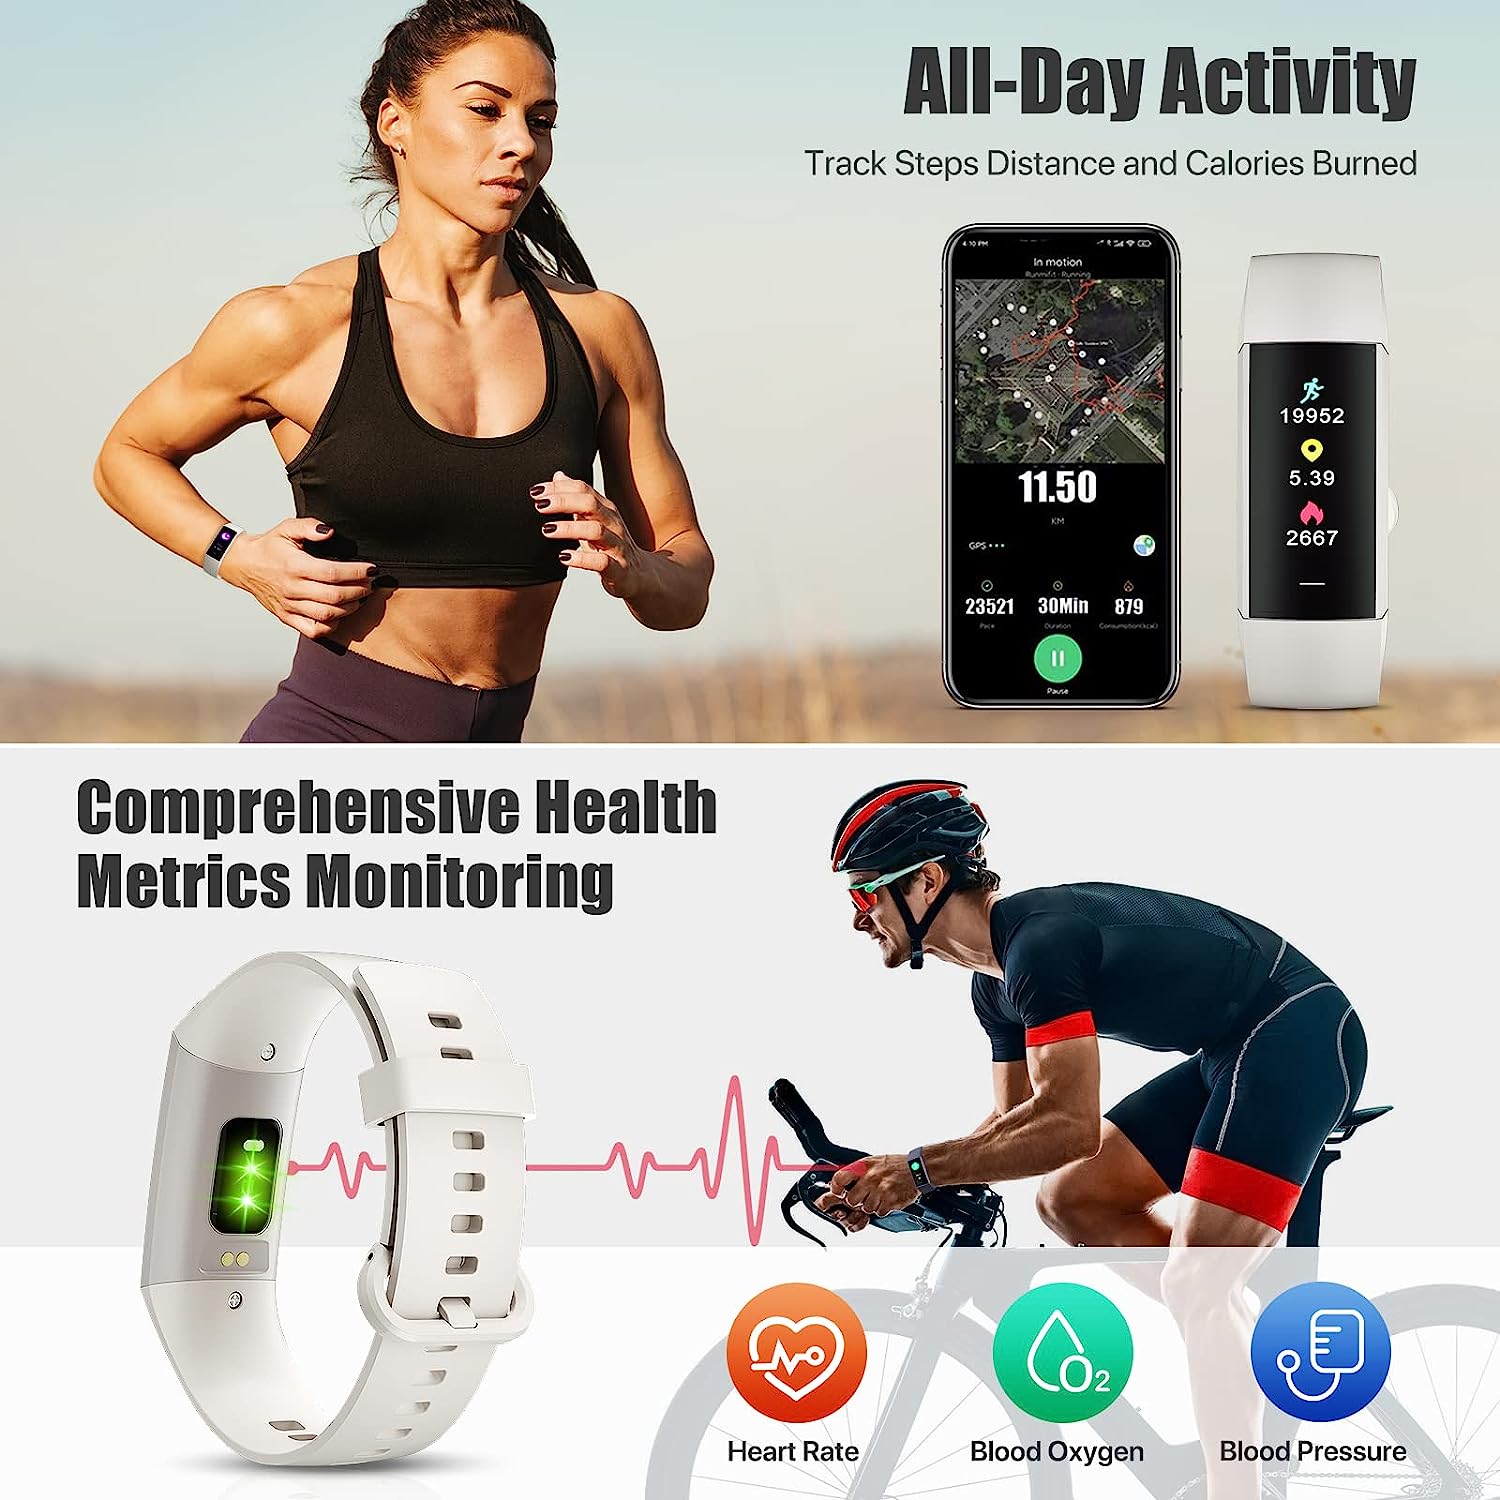 ST-CARE Fitness Tracker,1.10''AMOLED Touch Color Screen Action Tracker with Step Counter/Calories/Stopwatch, Health Tracker with Heart Rate Monitor, Sleep Tracker,Pedometer Watch for Women Men Kids